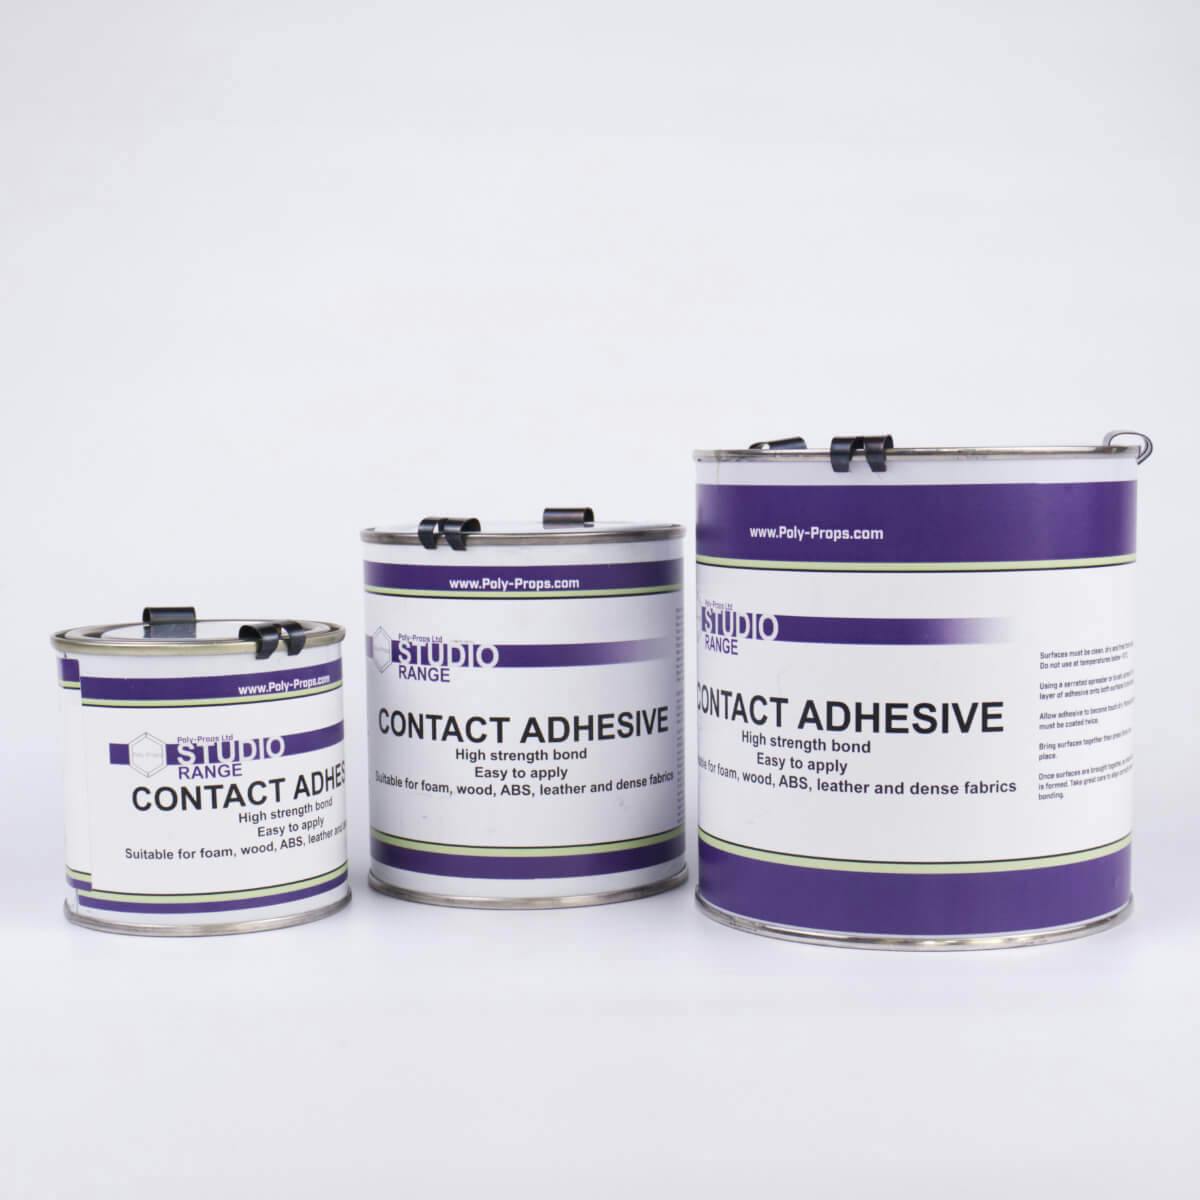 All contact adhesive sizes sorted from smallest